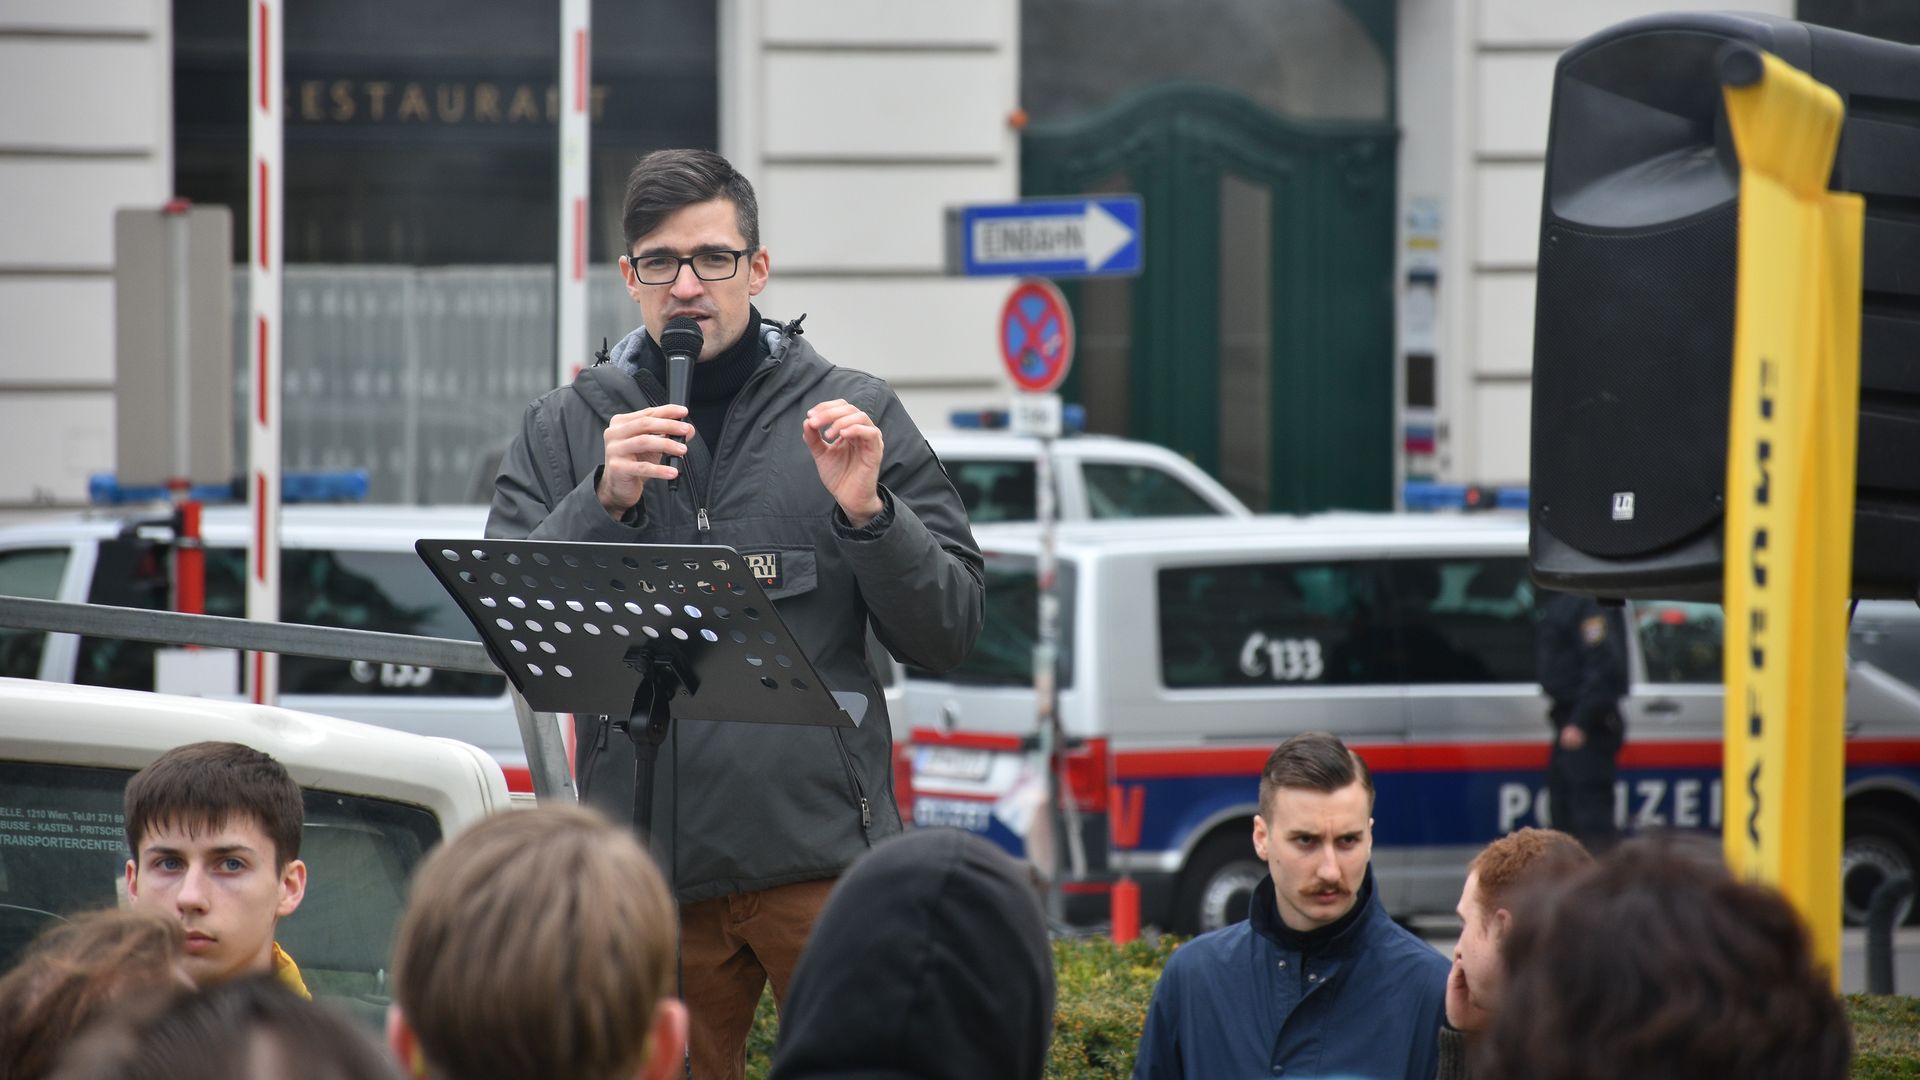 In this image, Martin Sellner stands and speaks into a microphone.